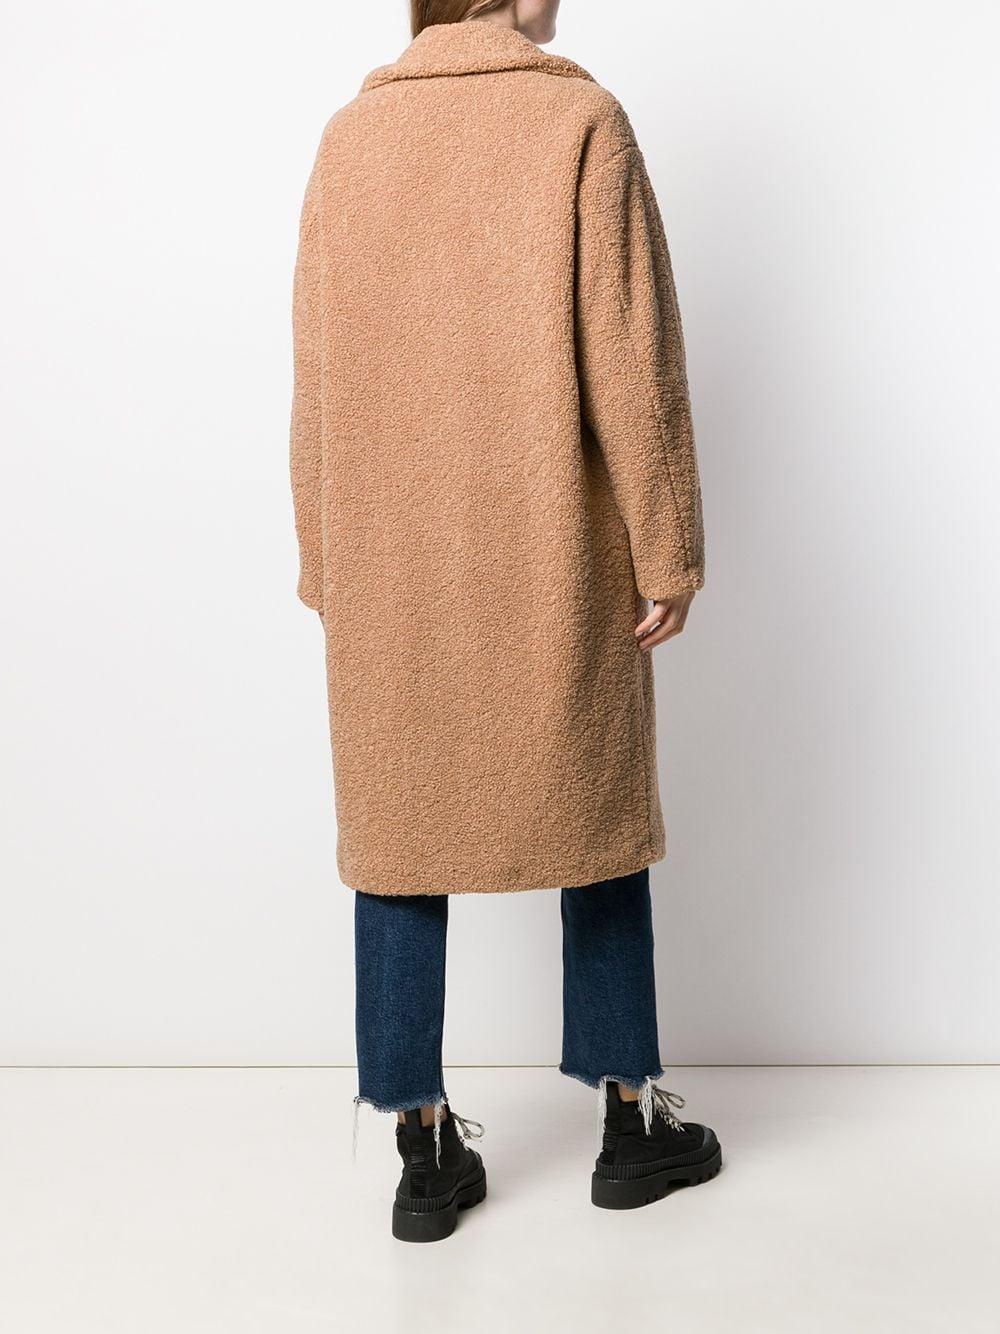 UGG Oversized Shearling Coat in Brown - Lyst